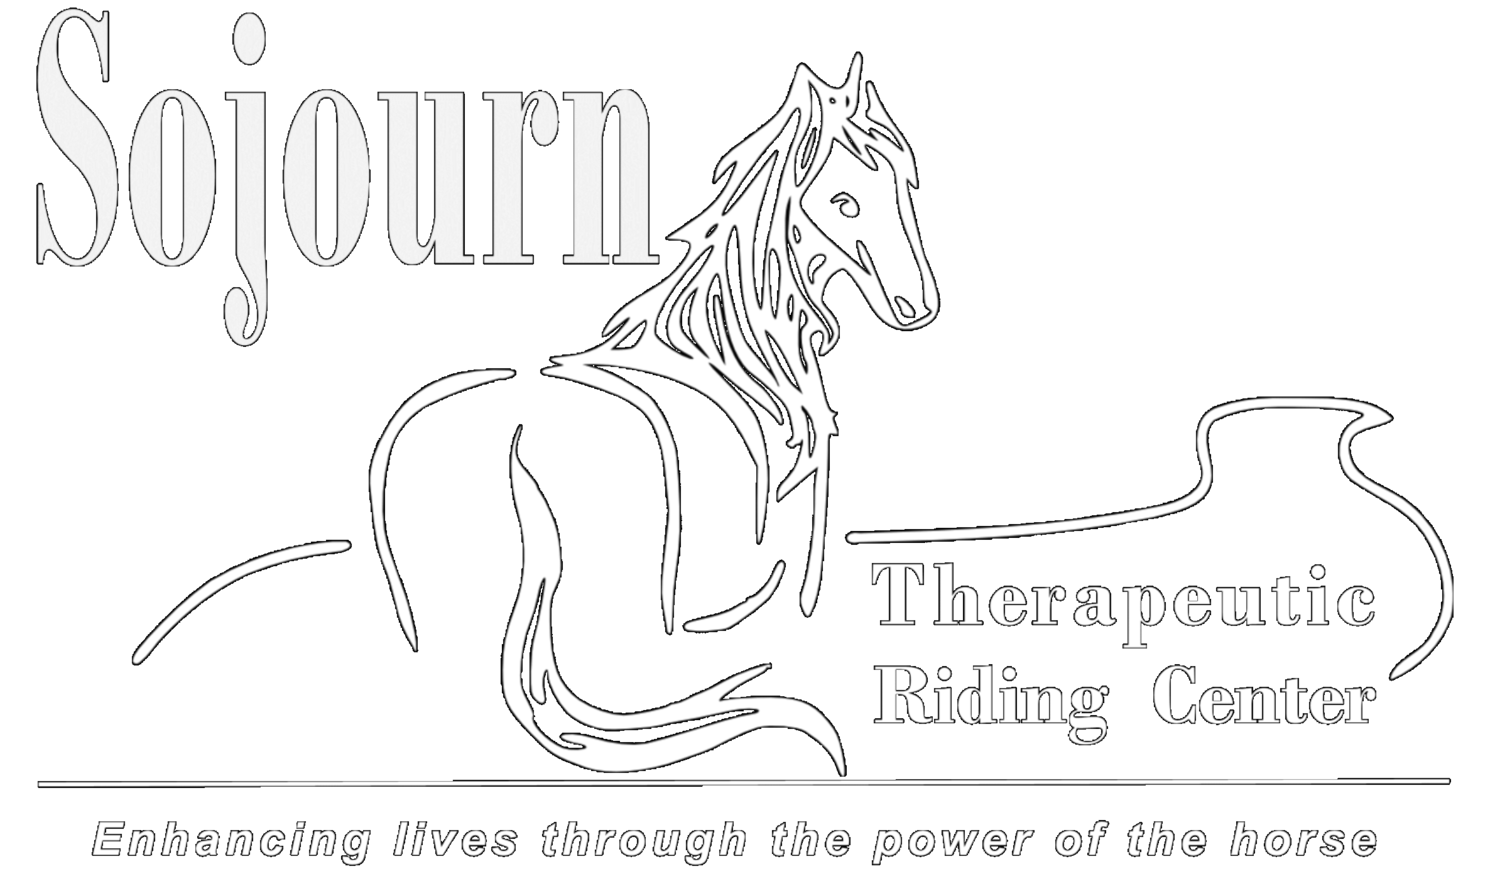 Sojourn Therapeutic Riding Center, NFP